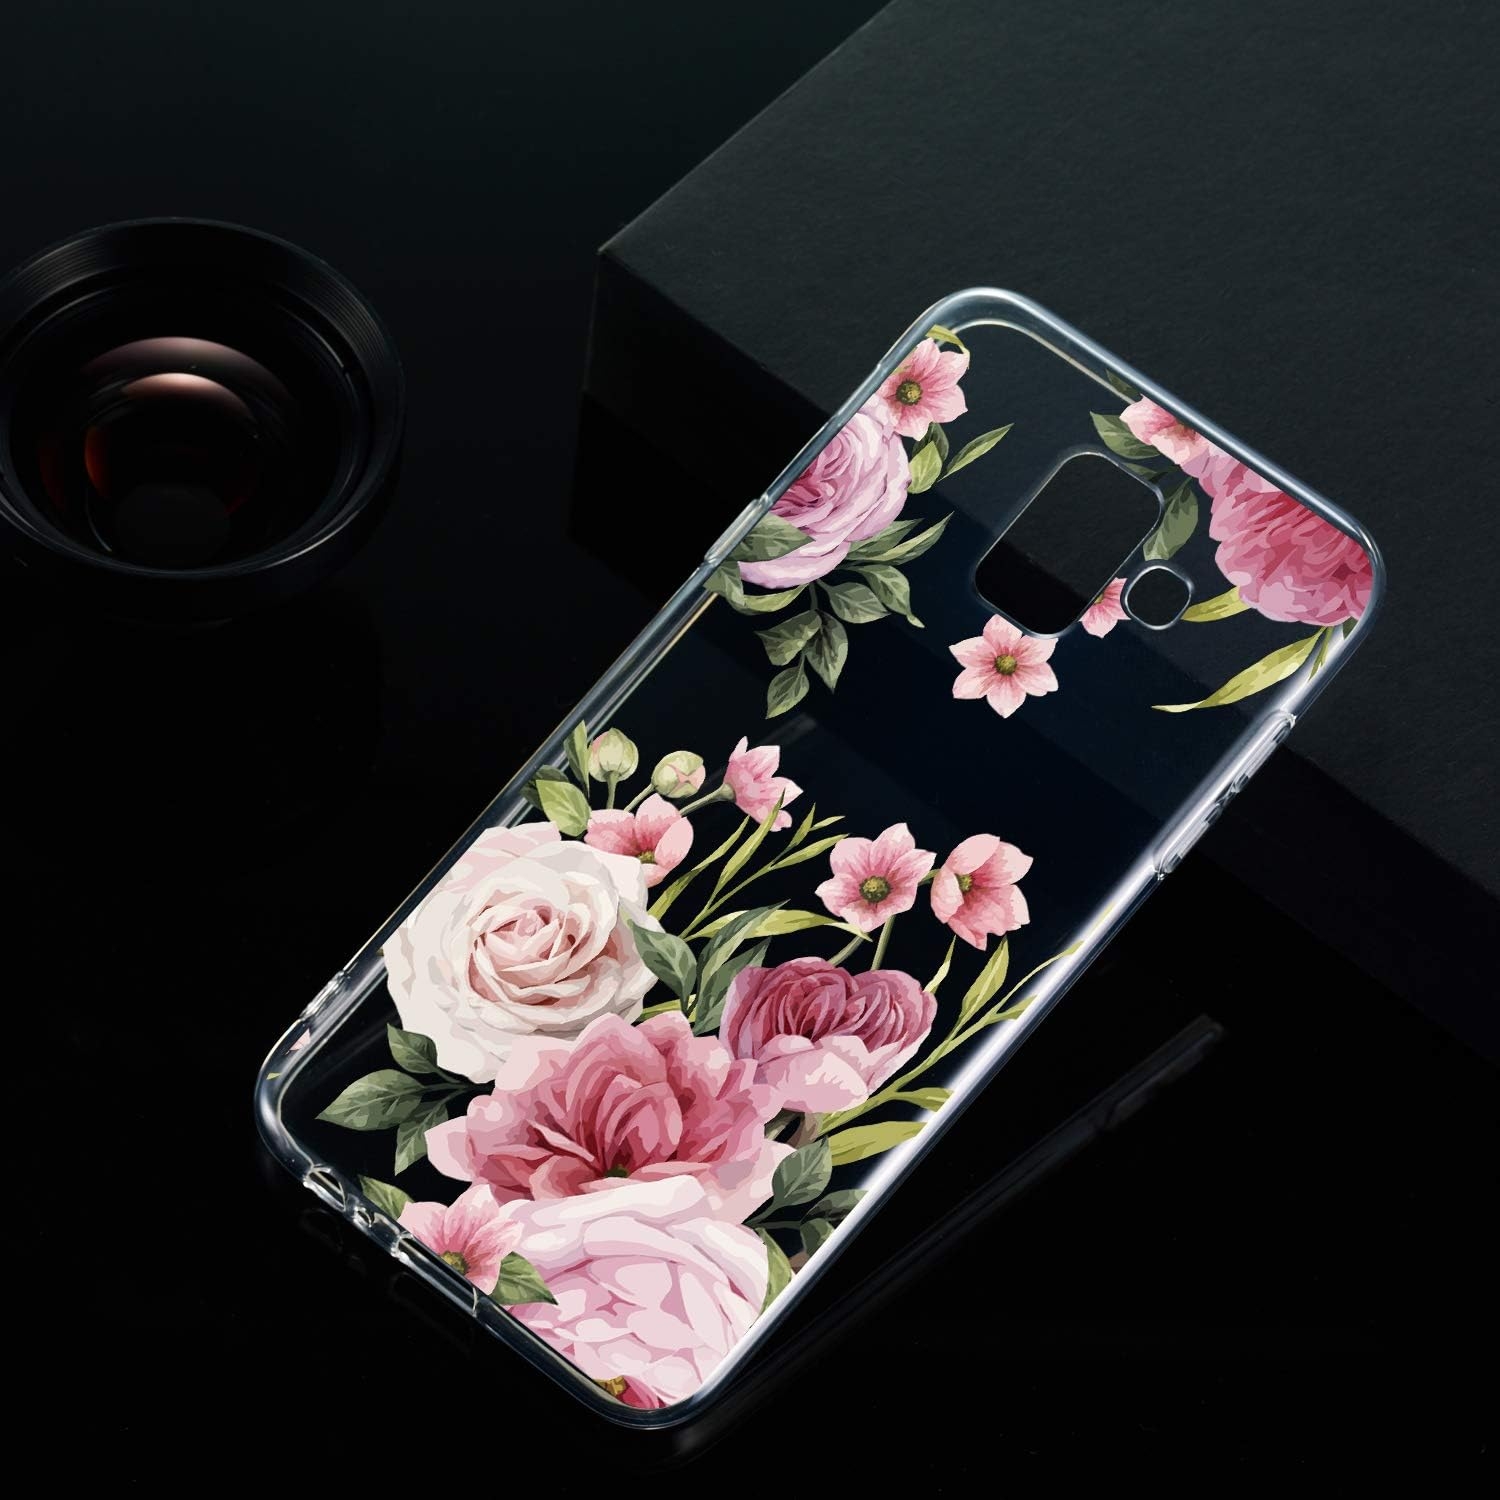 Amocase Cute Floral Case with 2 in 1 Stylus for Samsung Galaxy A6 Plus 2018,Stylish Ultra Thin Sweet Flowers Soft Rubber Silicone TPU Shockproof Anti-Scratch Flexible Clear Case - Pink Rose